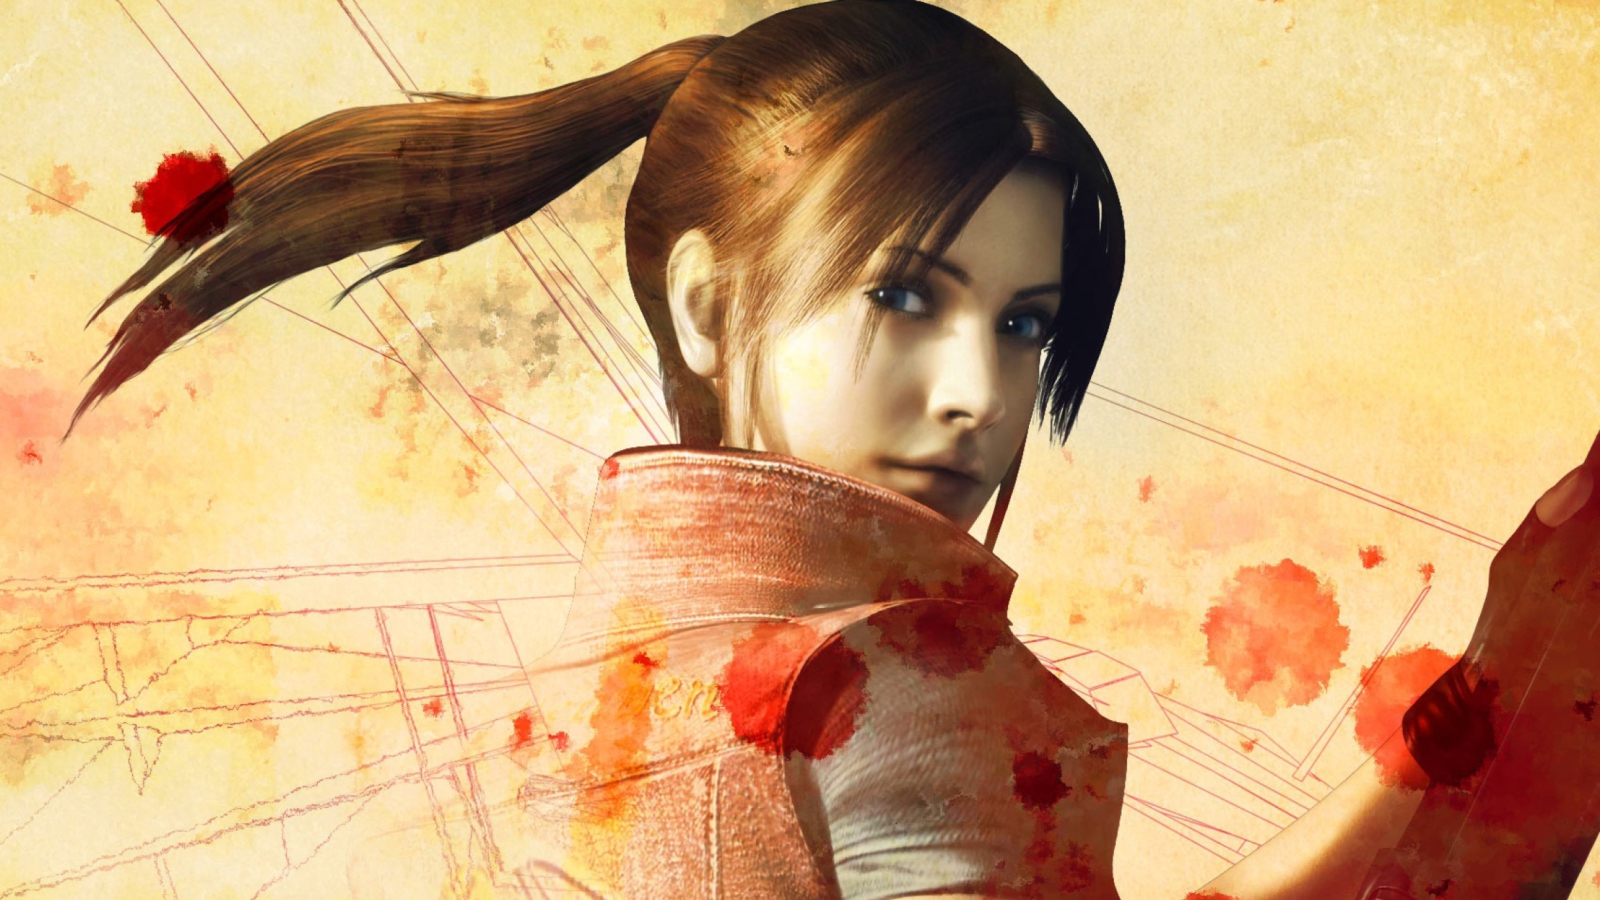 Resident Evil Claire Redfield screenshot #1 1600x900